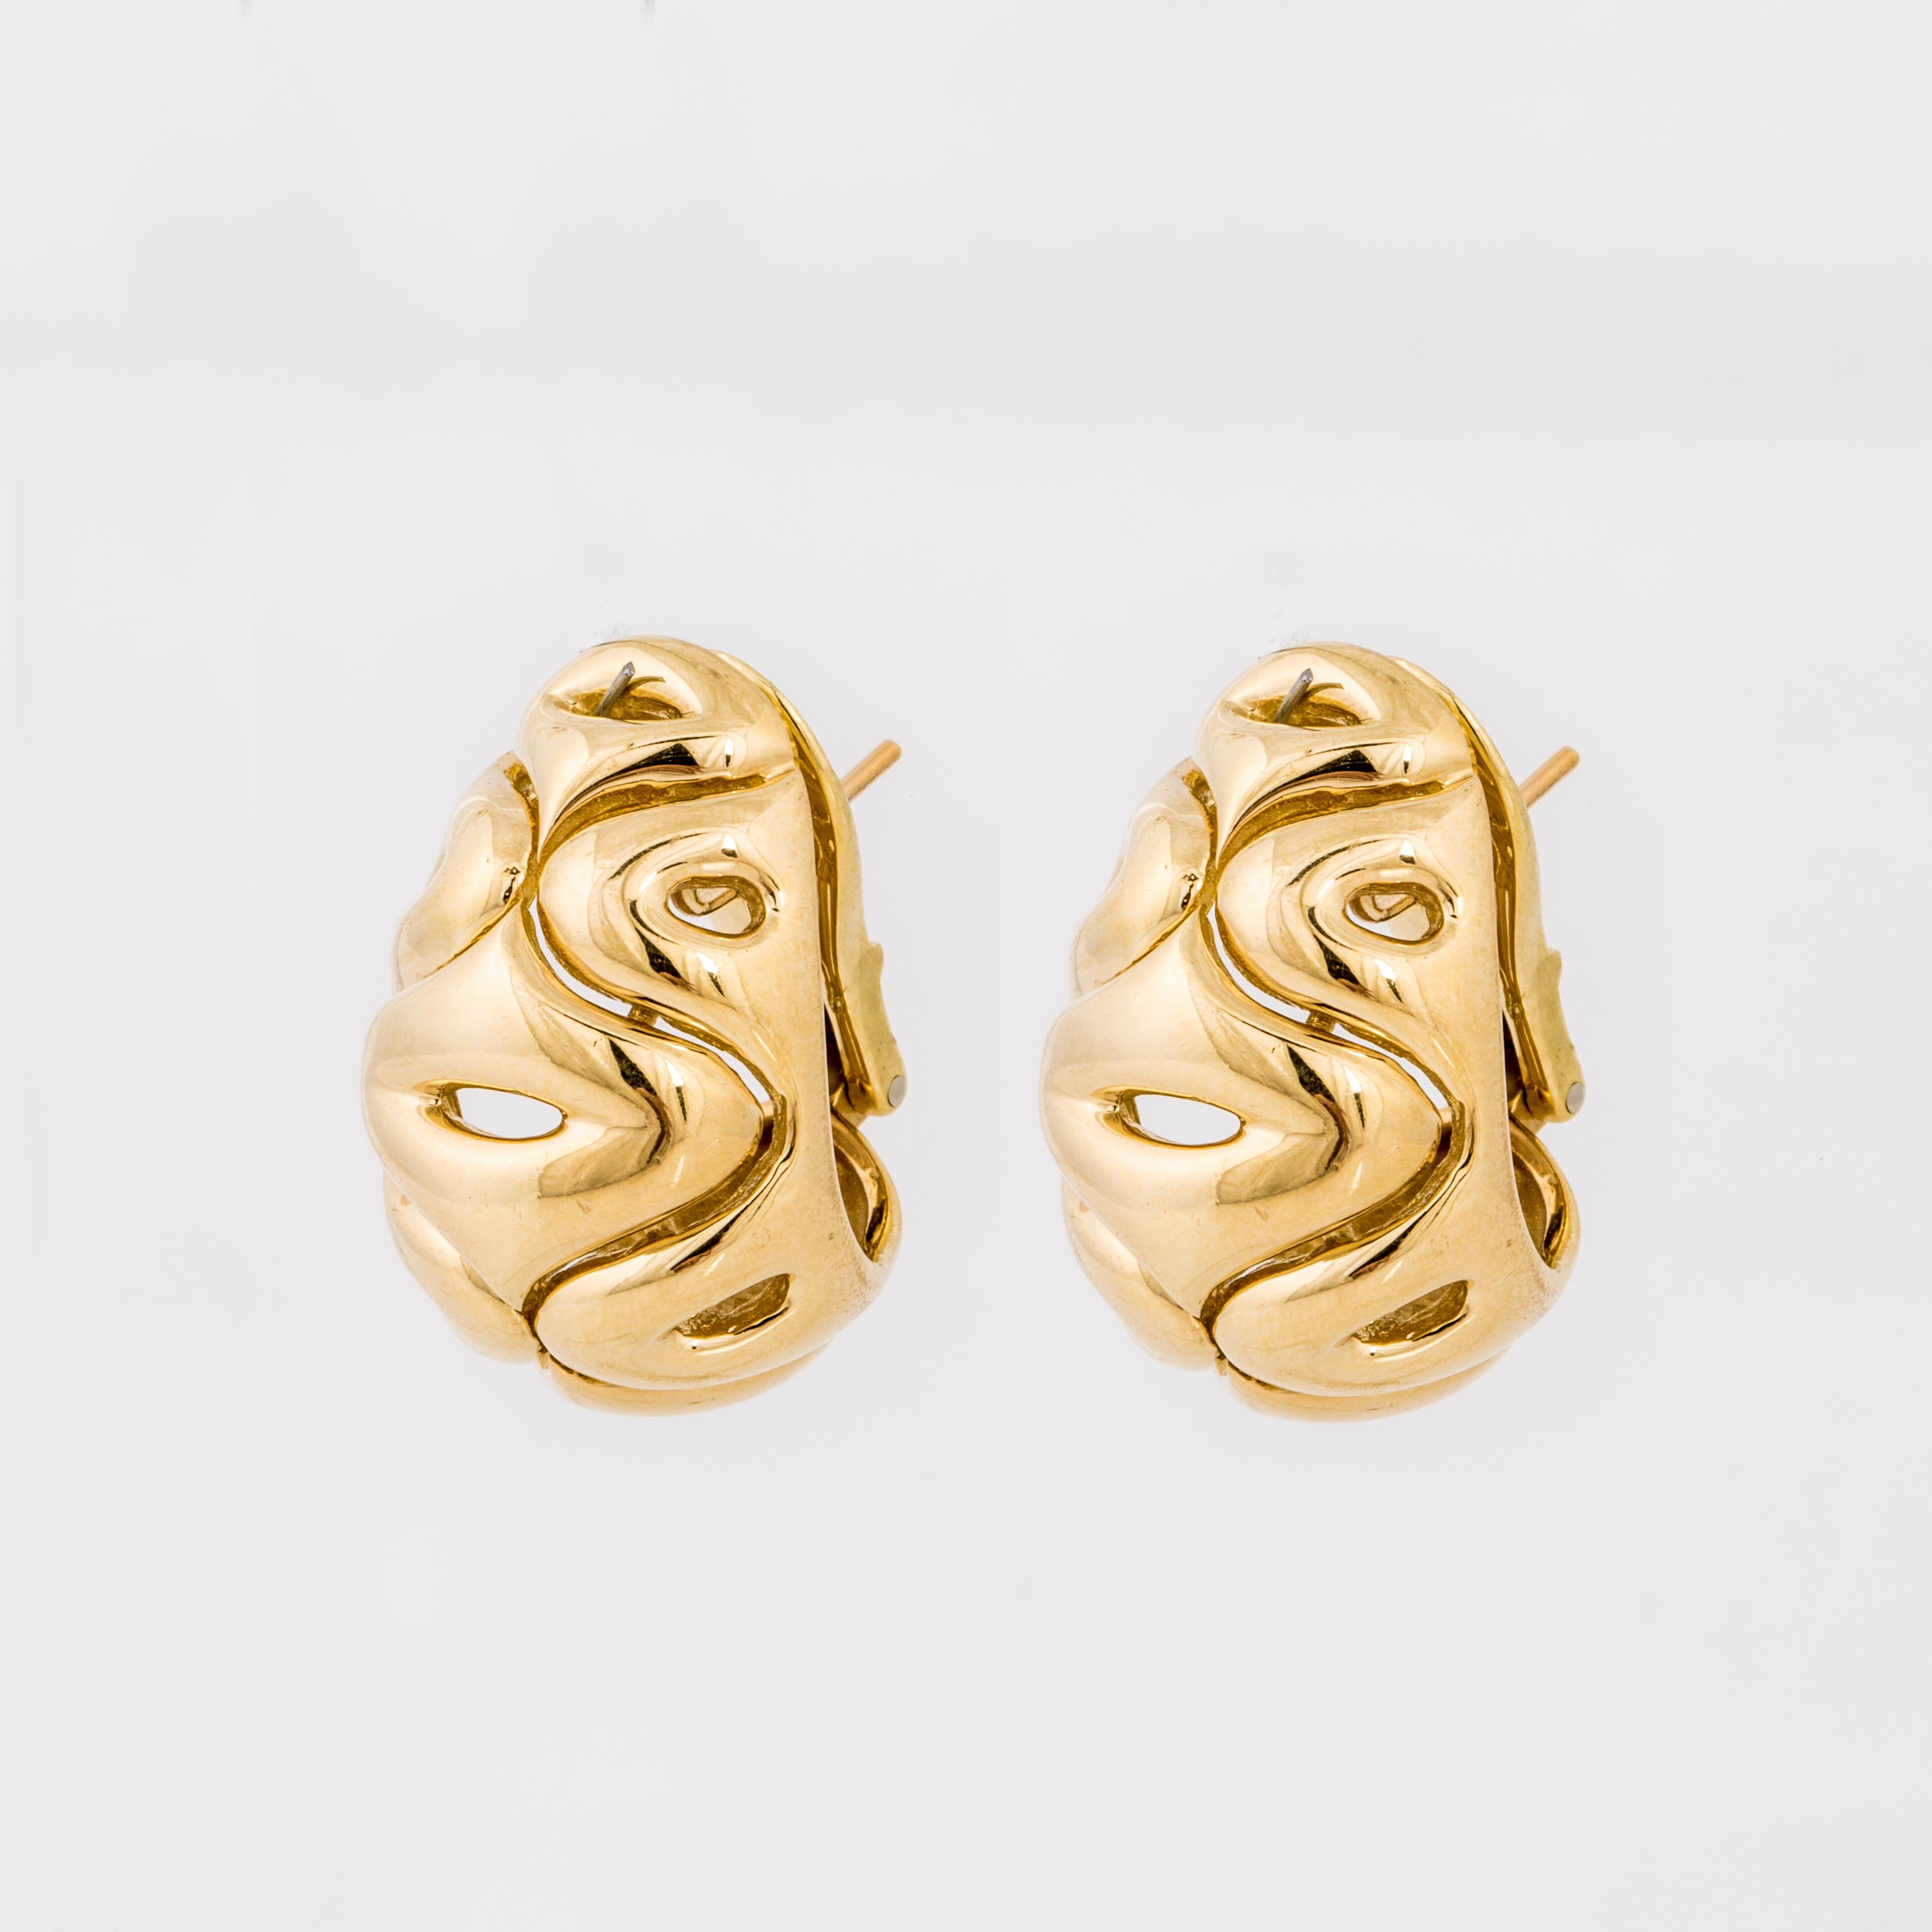 Van Cleef & Arpels earrings in 18K yellow gold with a swirl pattern. These are for pierced ears with a lever back.  Measure 1 inch long and 3/4 inches wide.  Serial No. NY3K750-10.